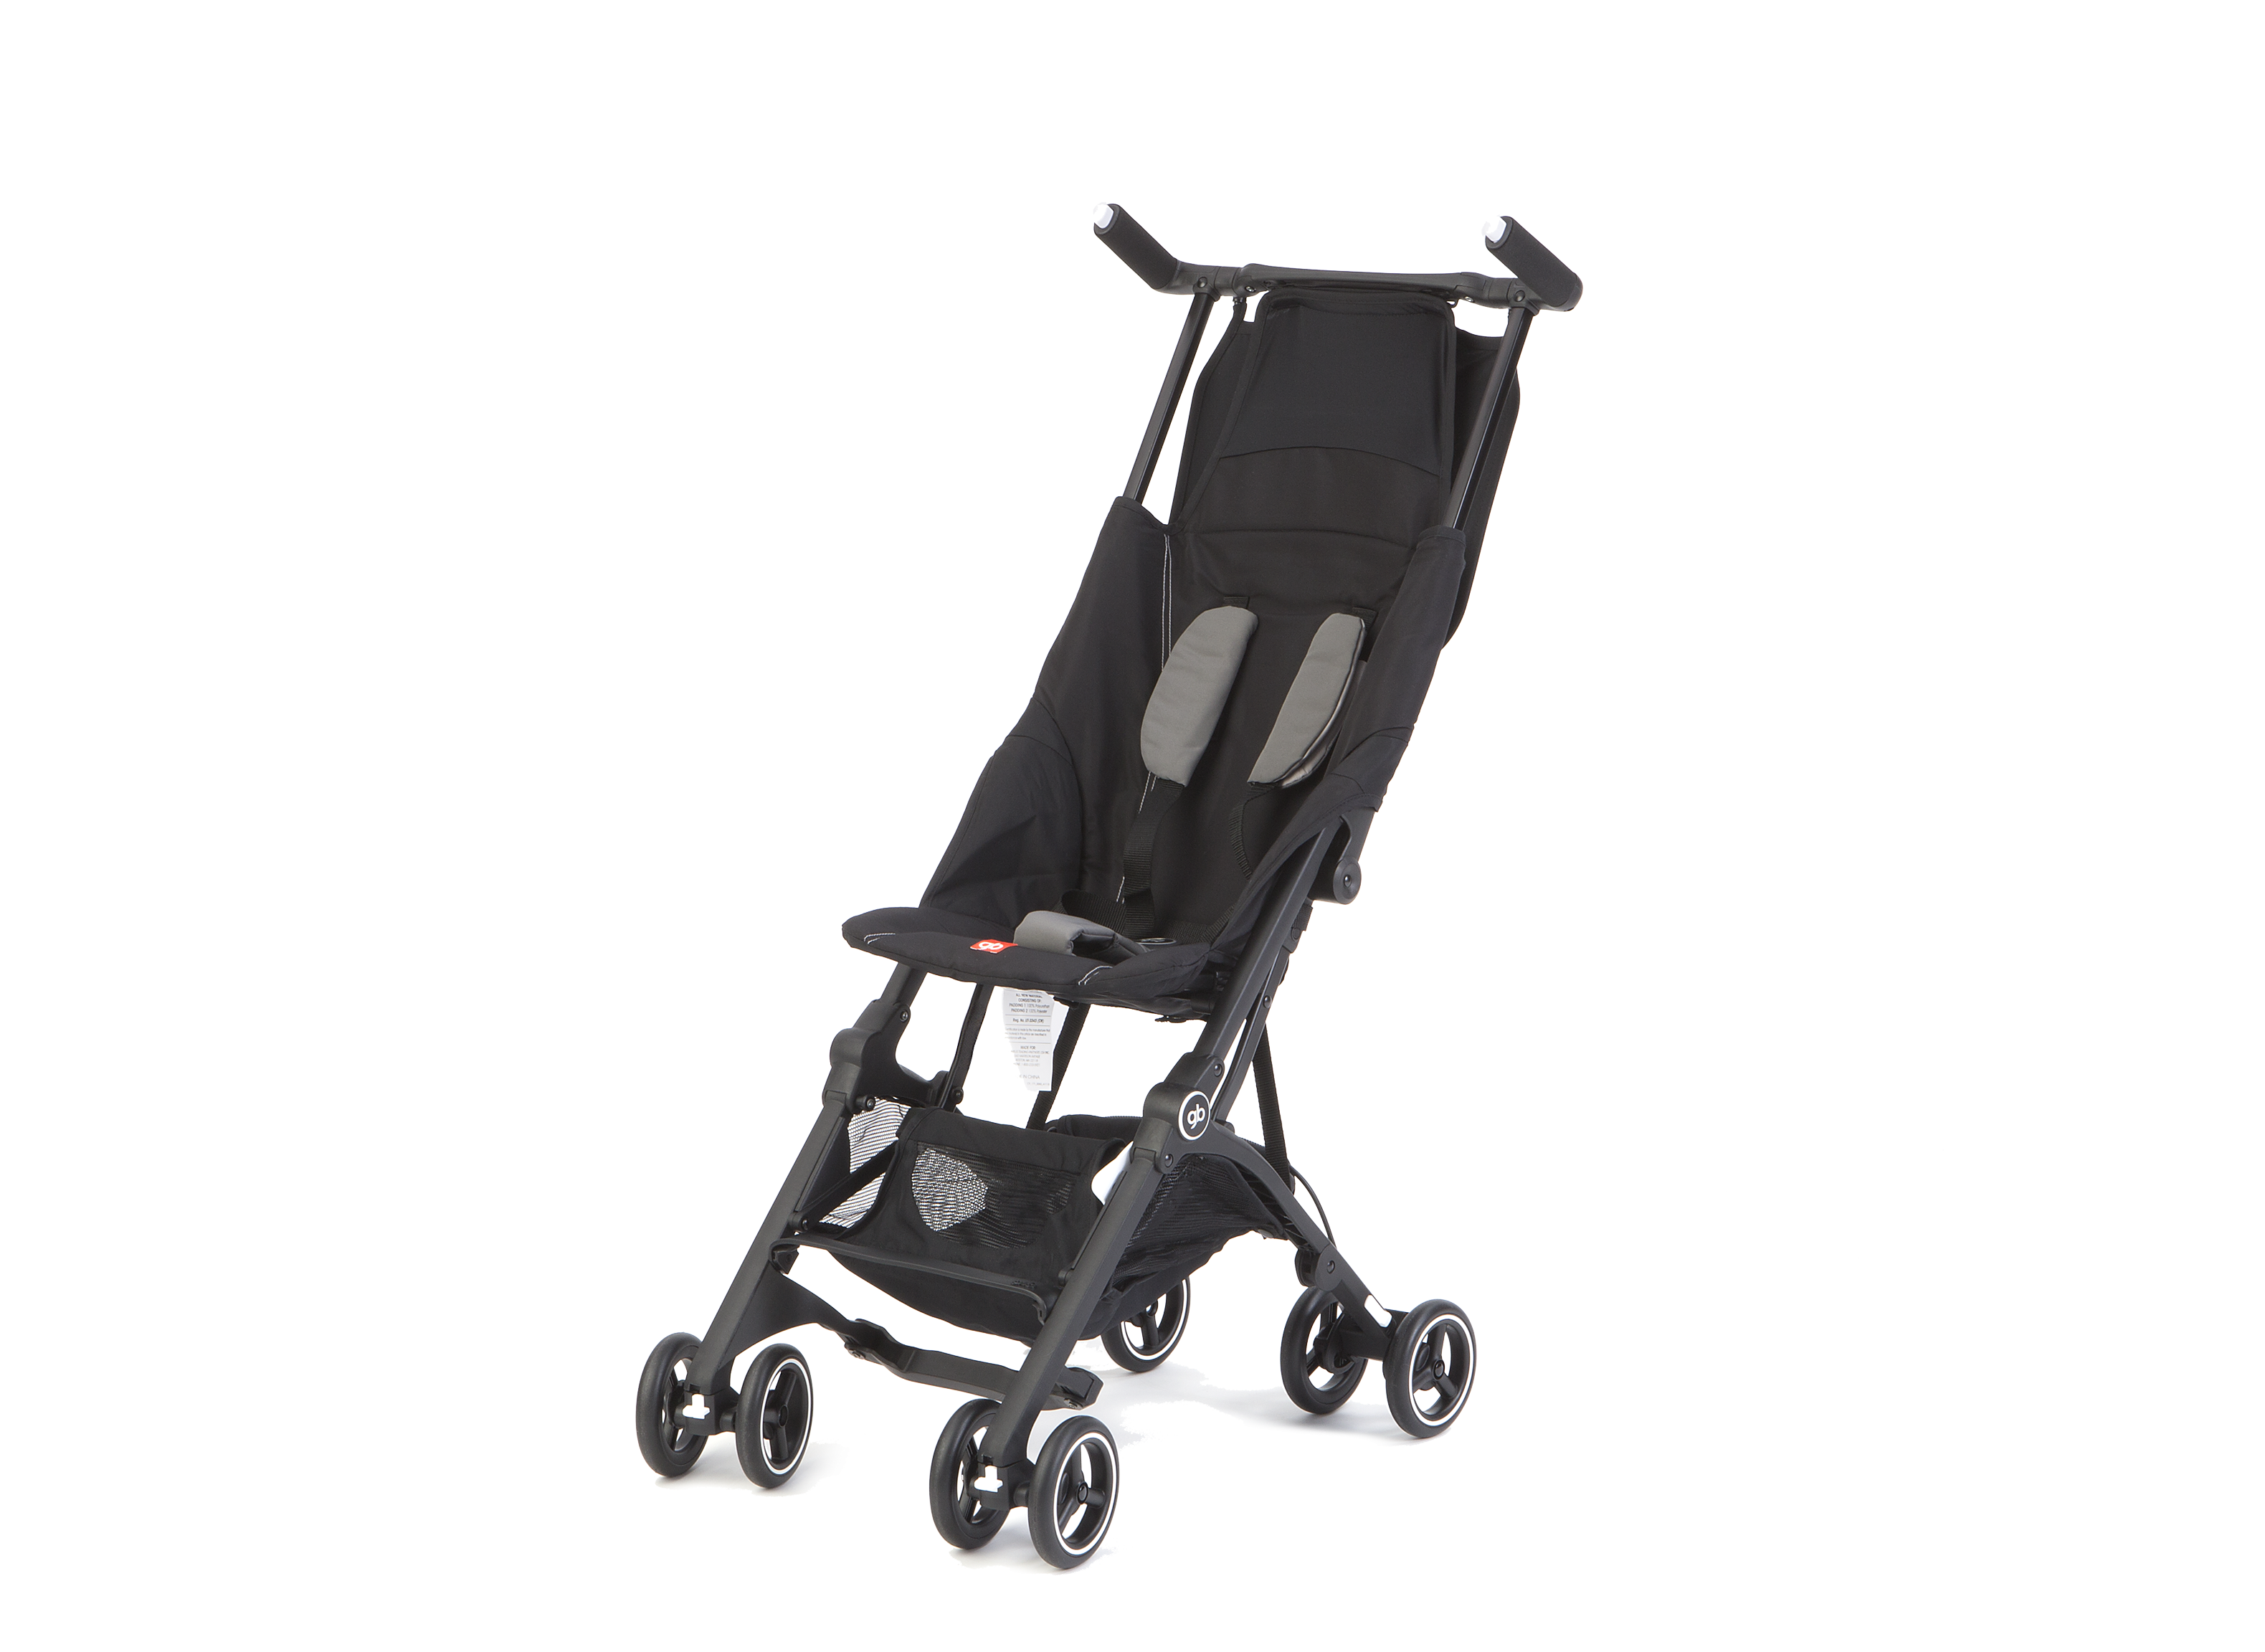 GB Pockit Stroller Review - Consumer Reports